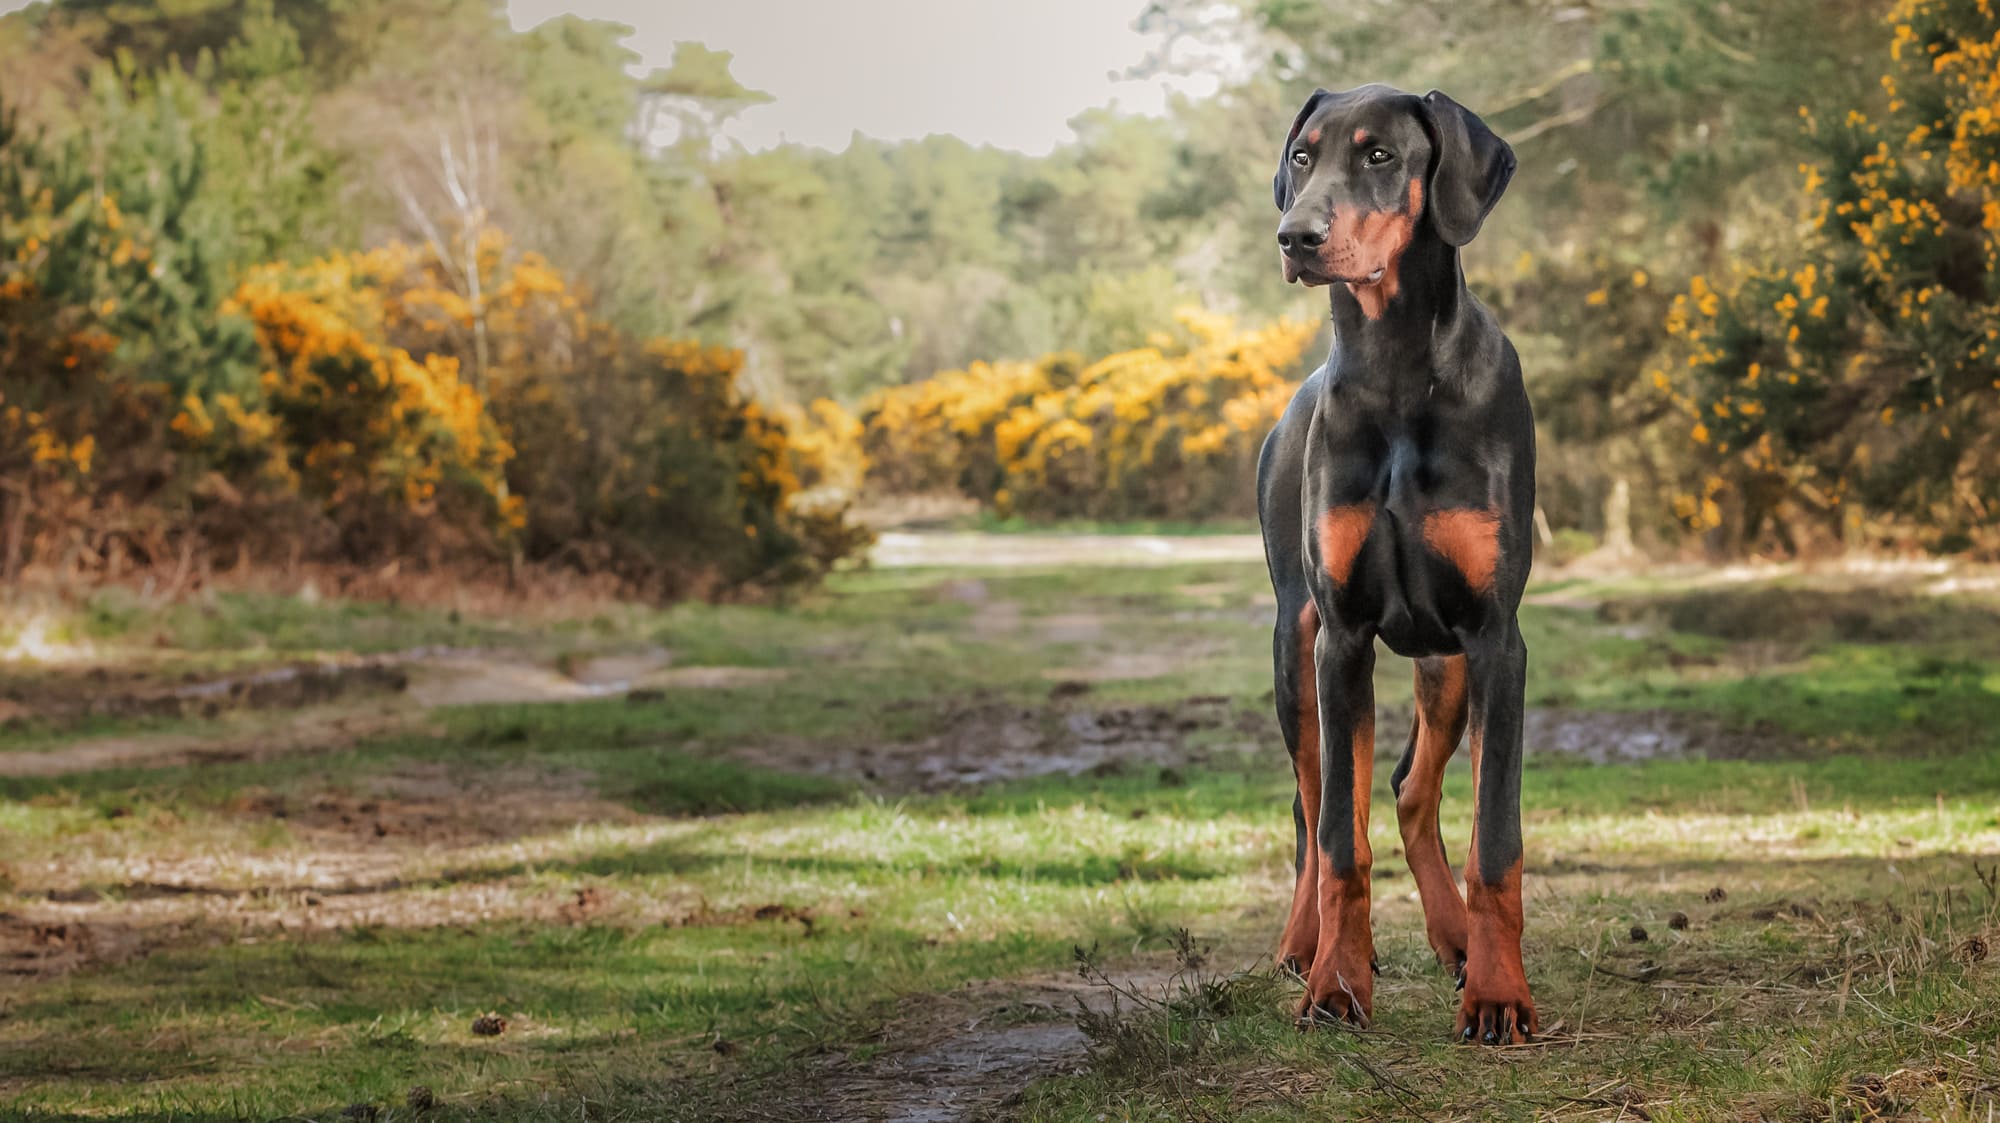 Nic Bisseker photography dog photographer sussex